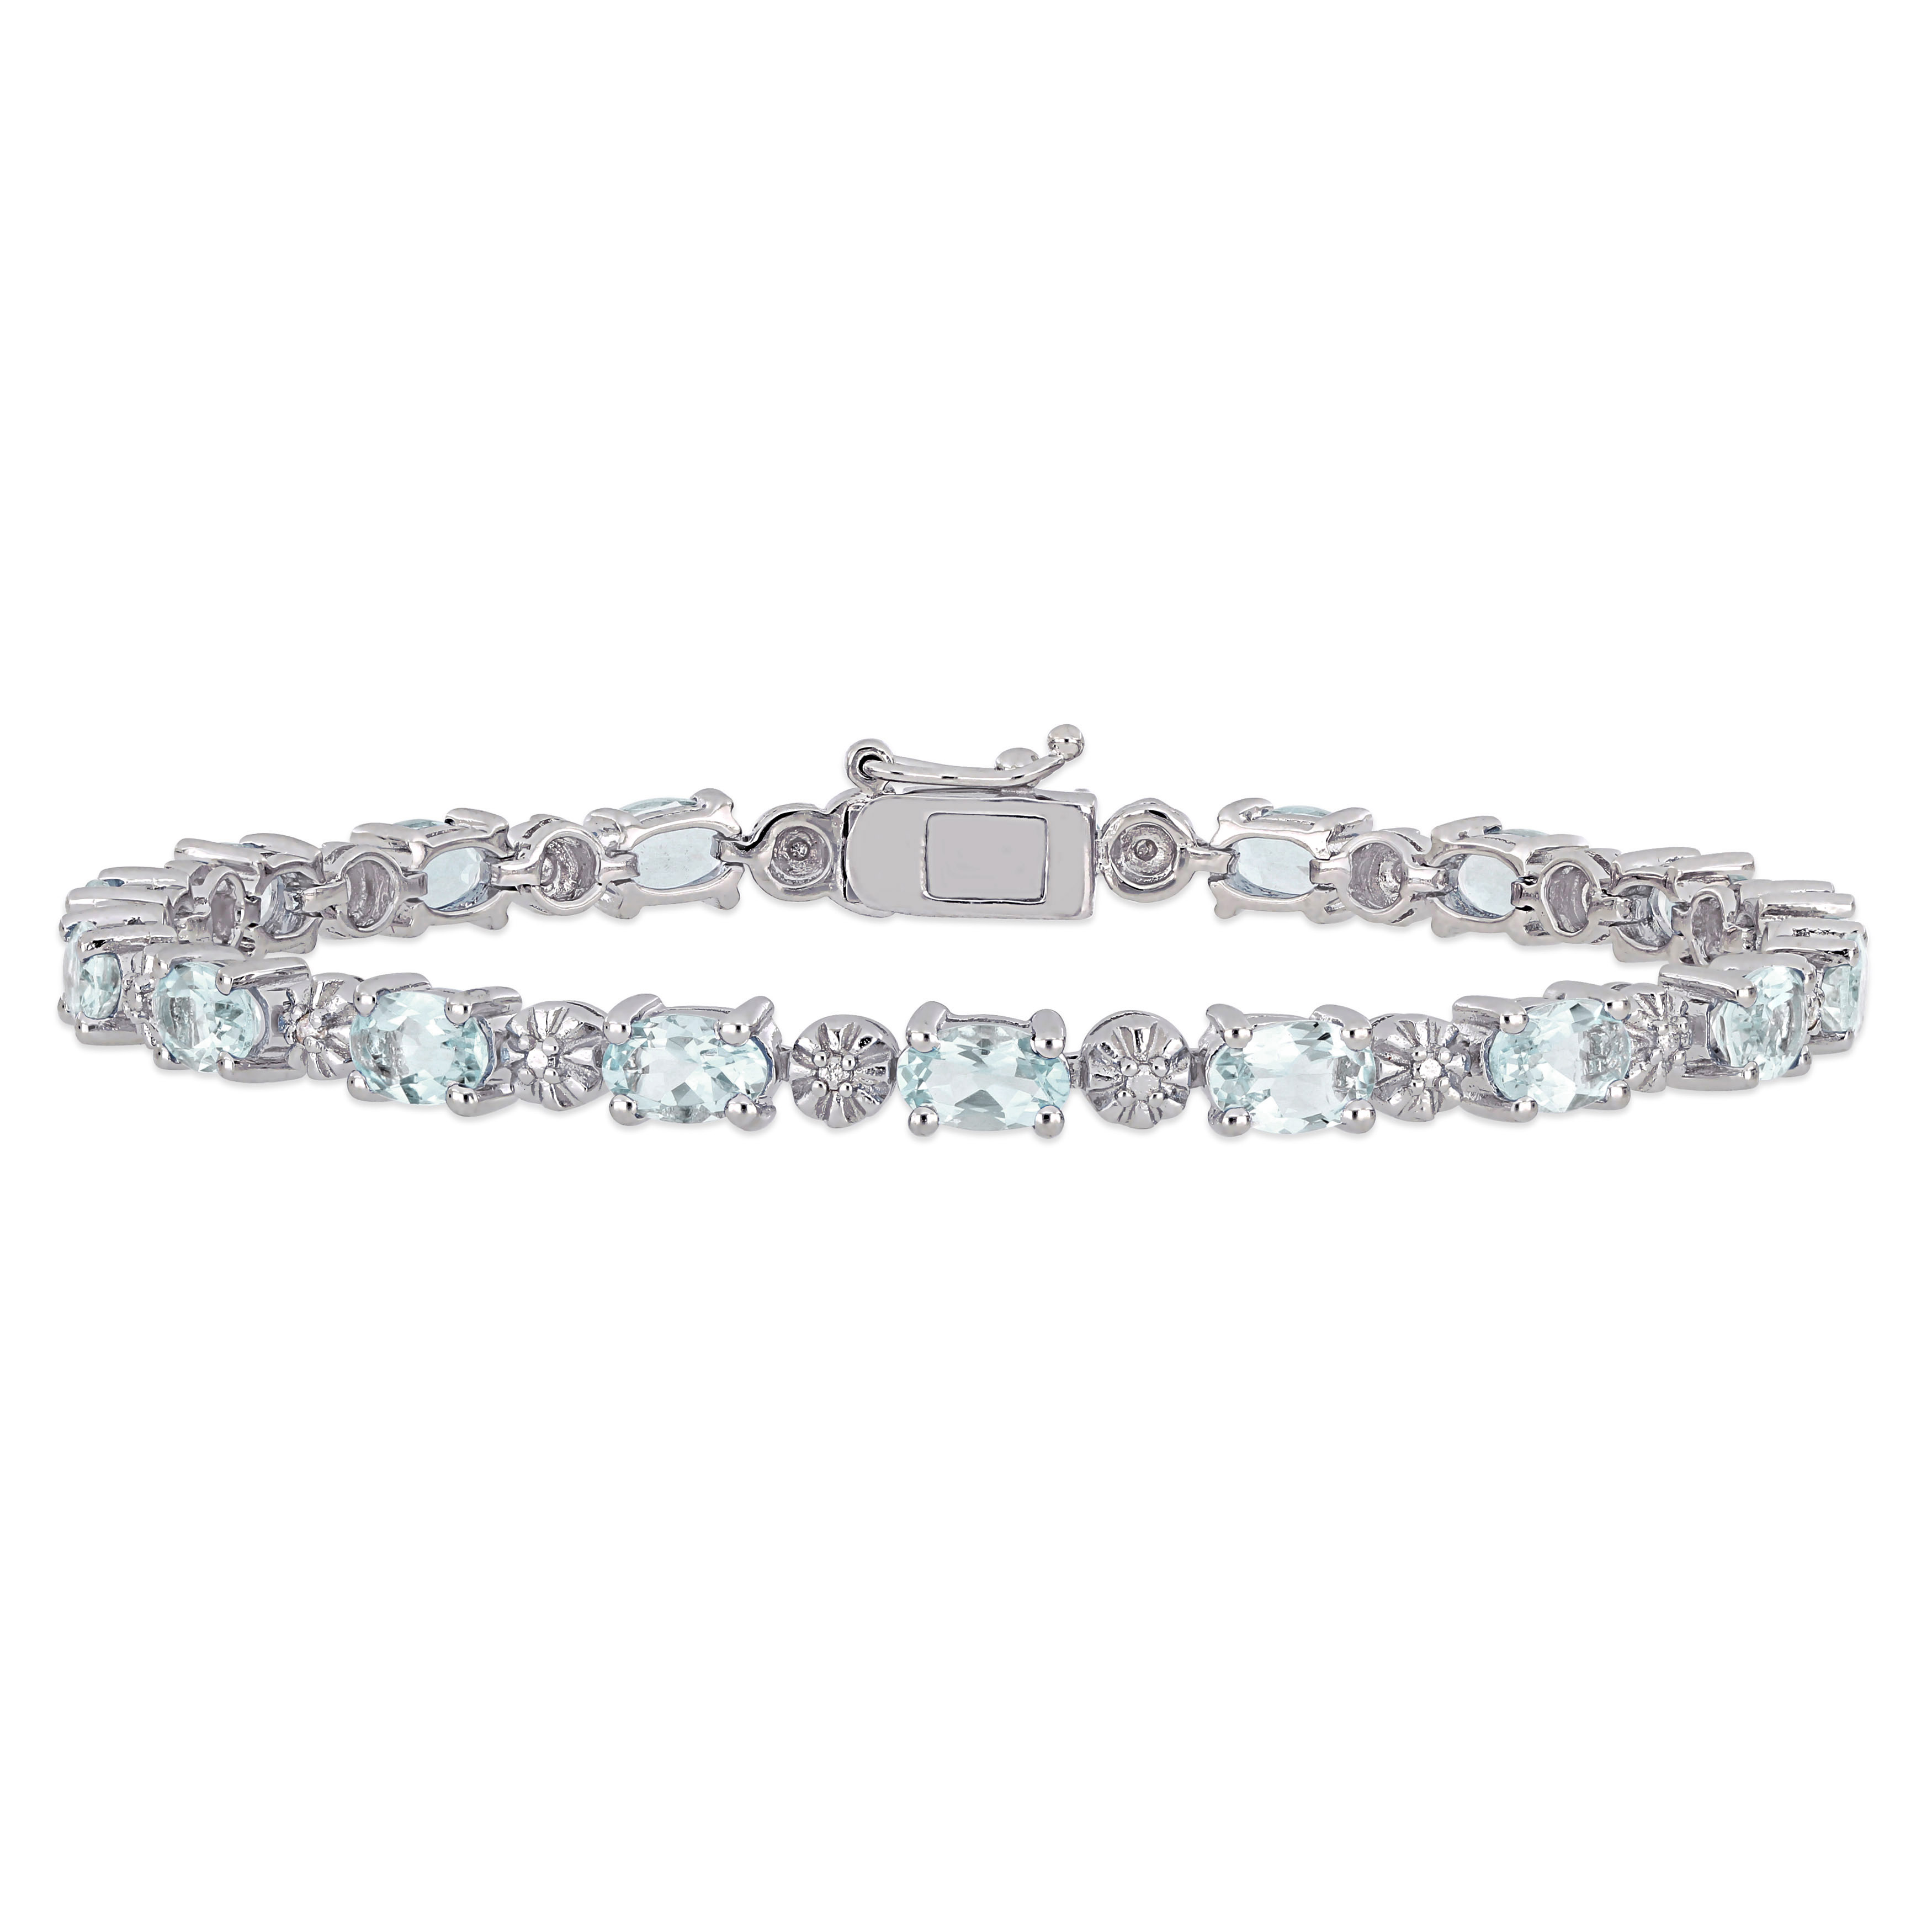 7 1/5 CT TGW Aquamarine and Diamond Accent Tennis Bracelet in Sterling Silver - 7.25 in.